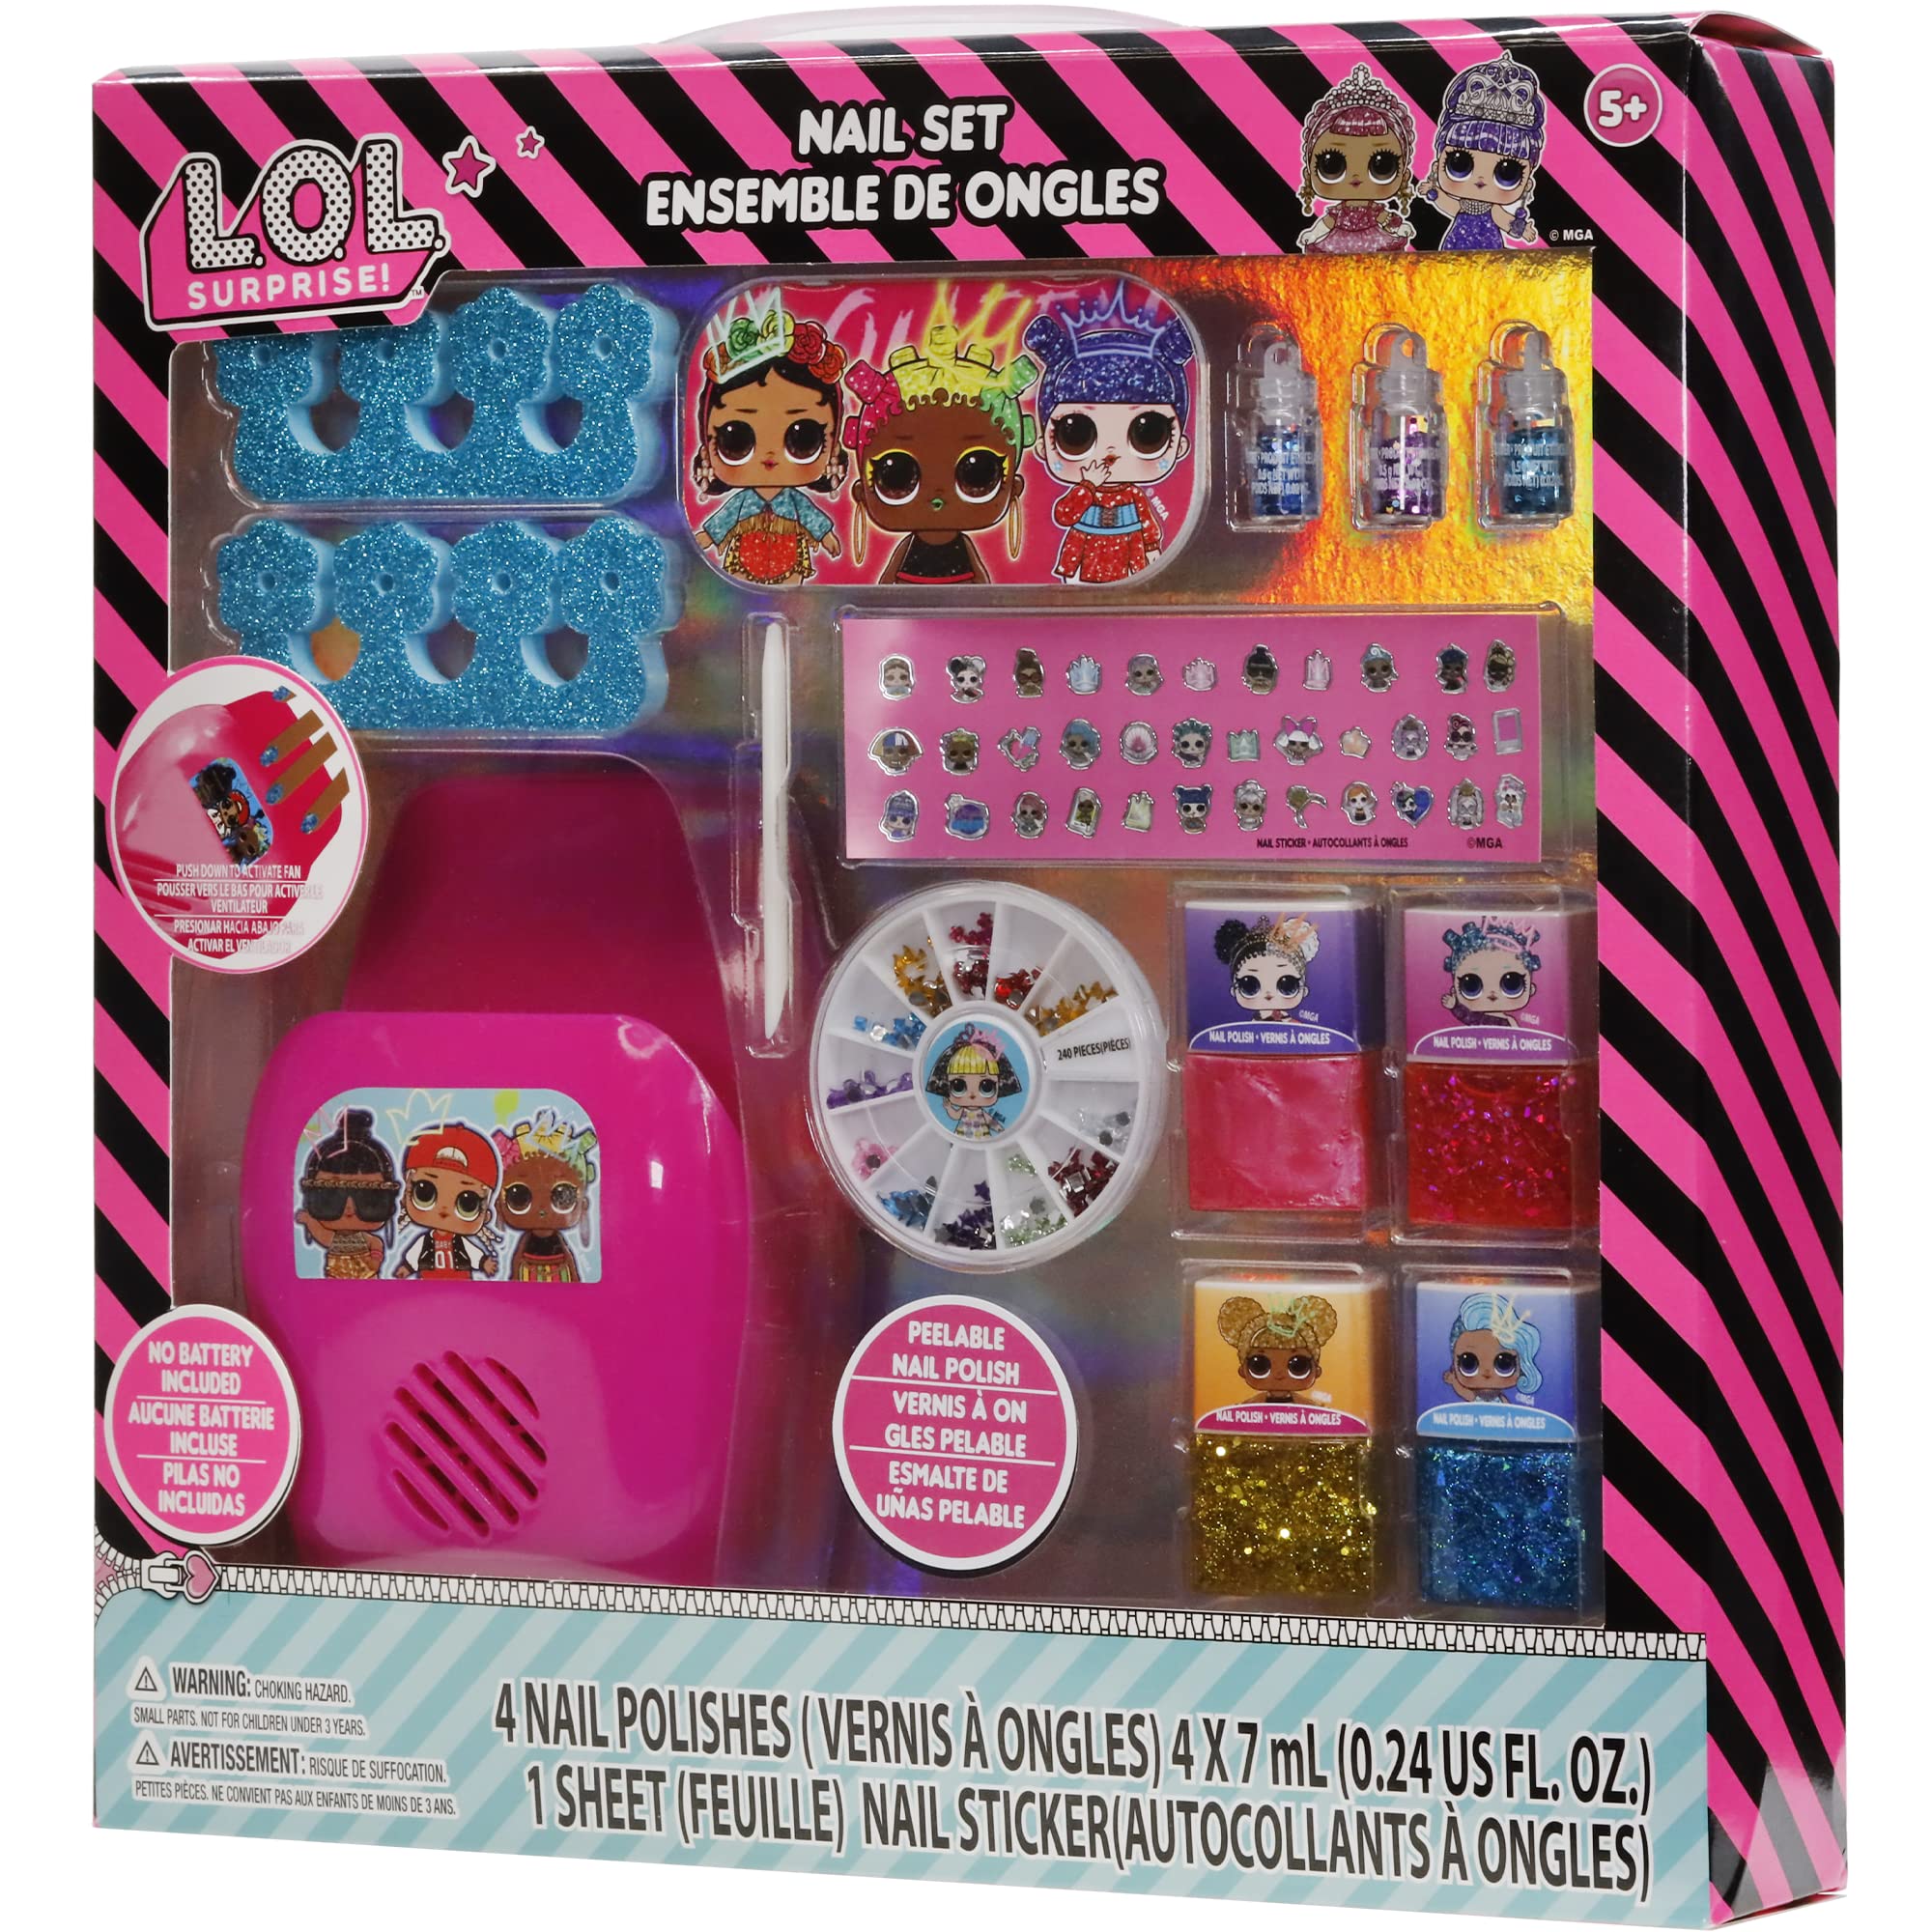 Toys League Small Nail Art Kit For Girls